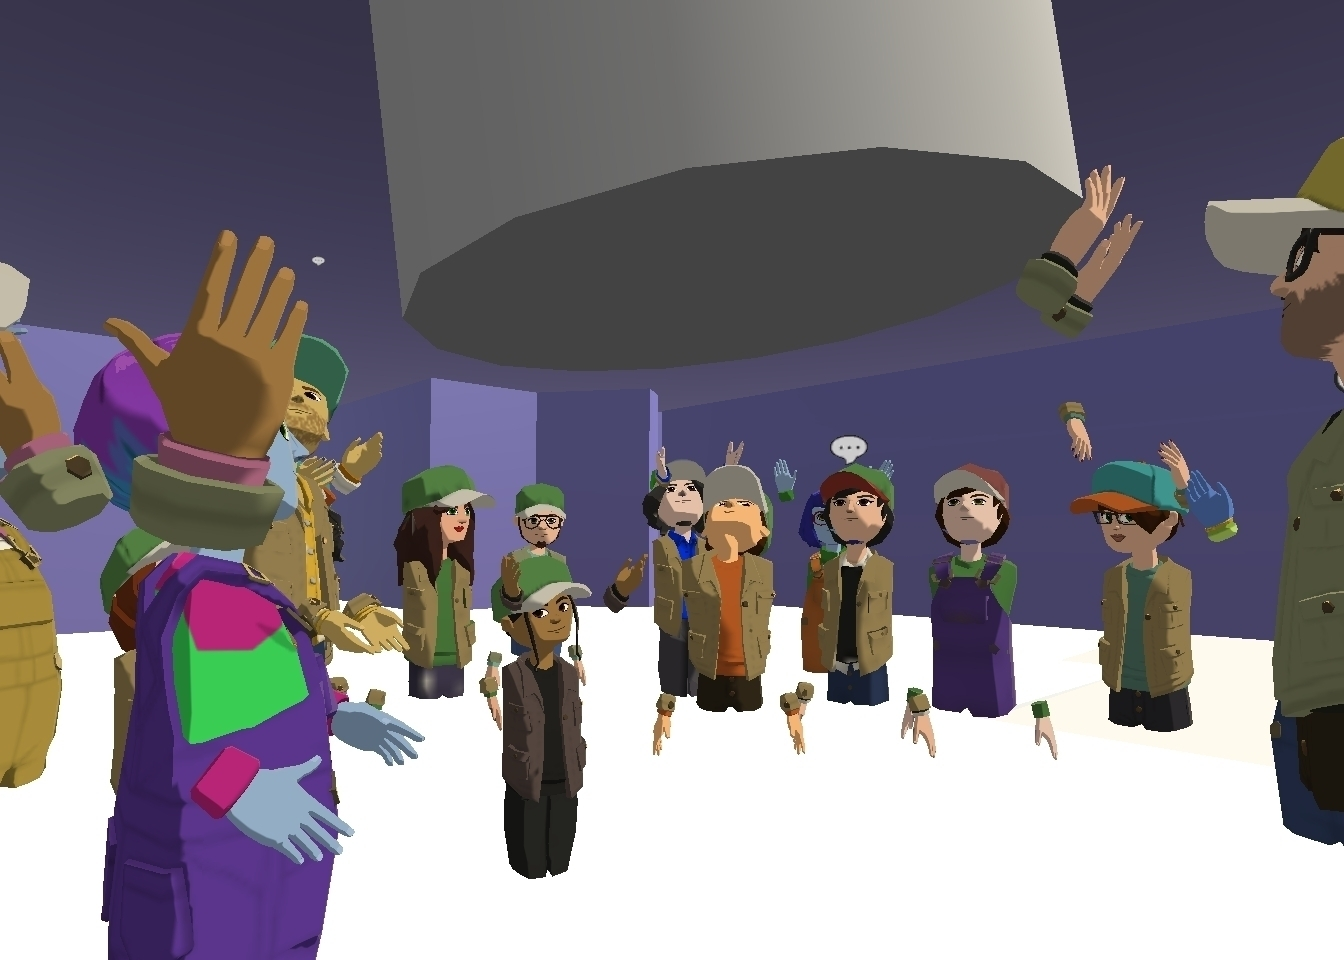 An audience of avatars, all in baseball caps, stand in a circle in the Collider Altspace world, with instructions from the Collider team on how to navigate the experience. Some audience members are learning to use emojis, which are floating above their avatar heads.